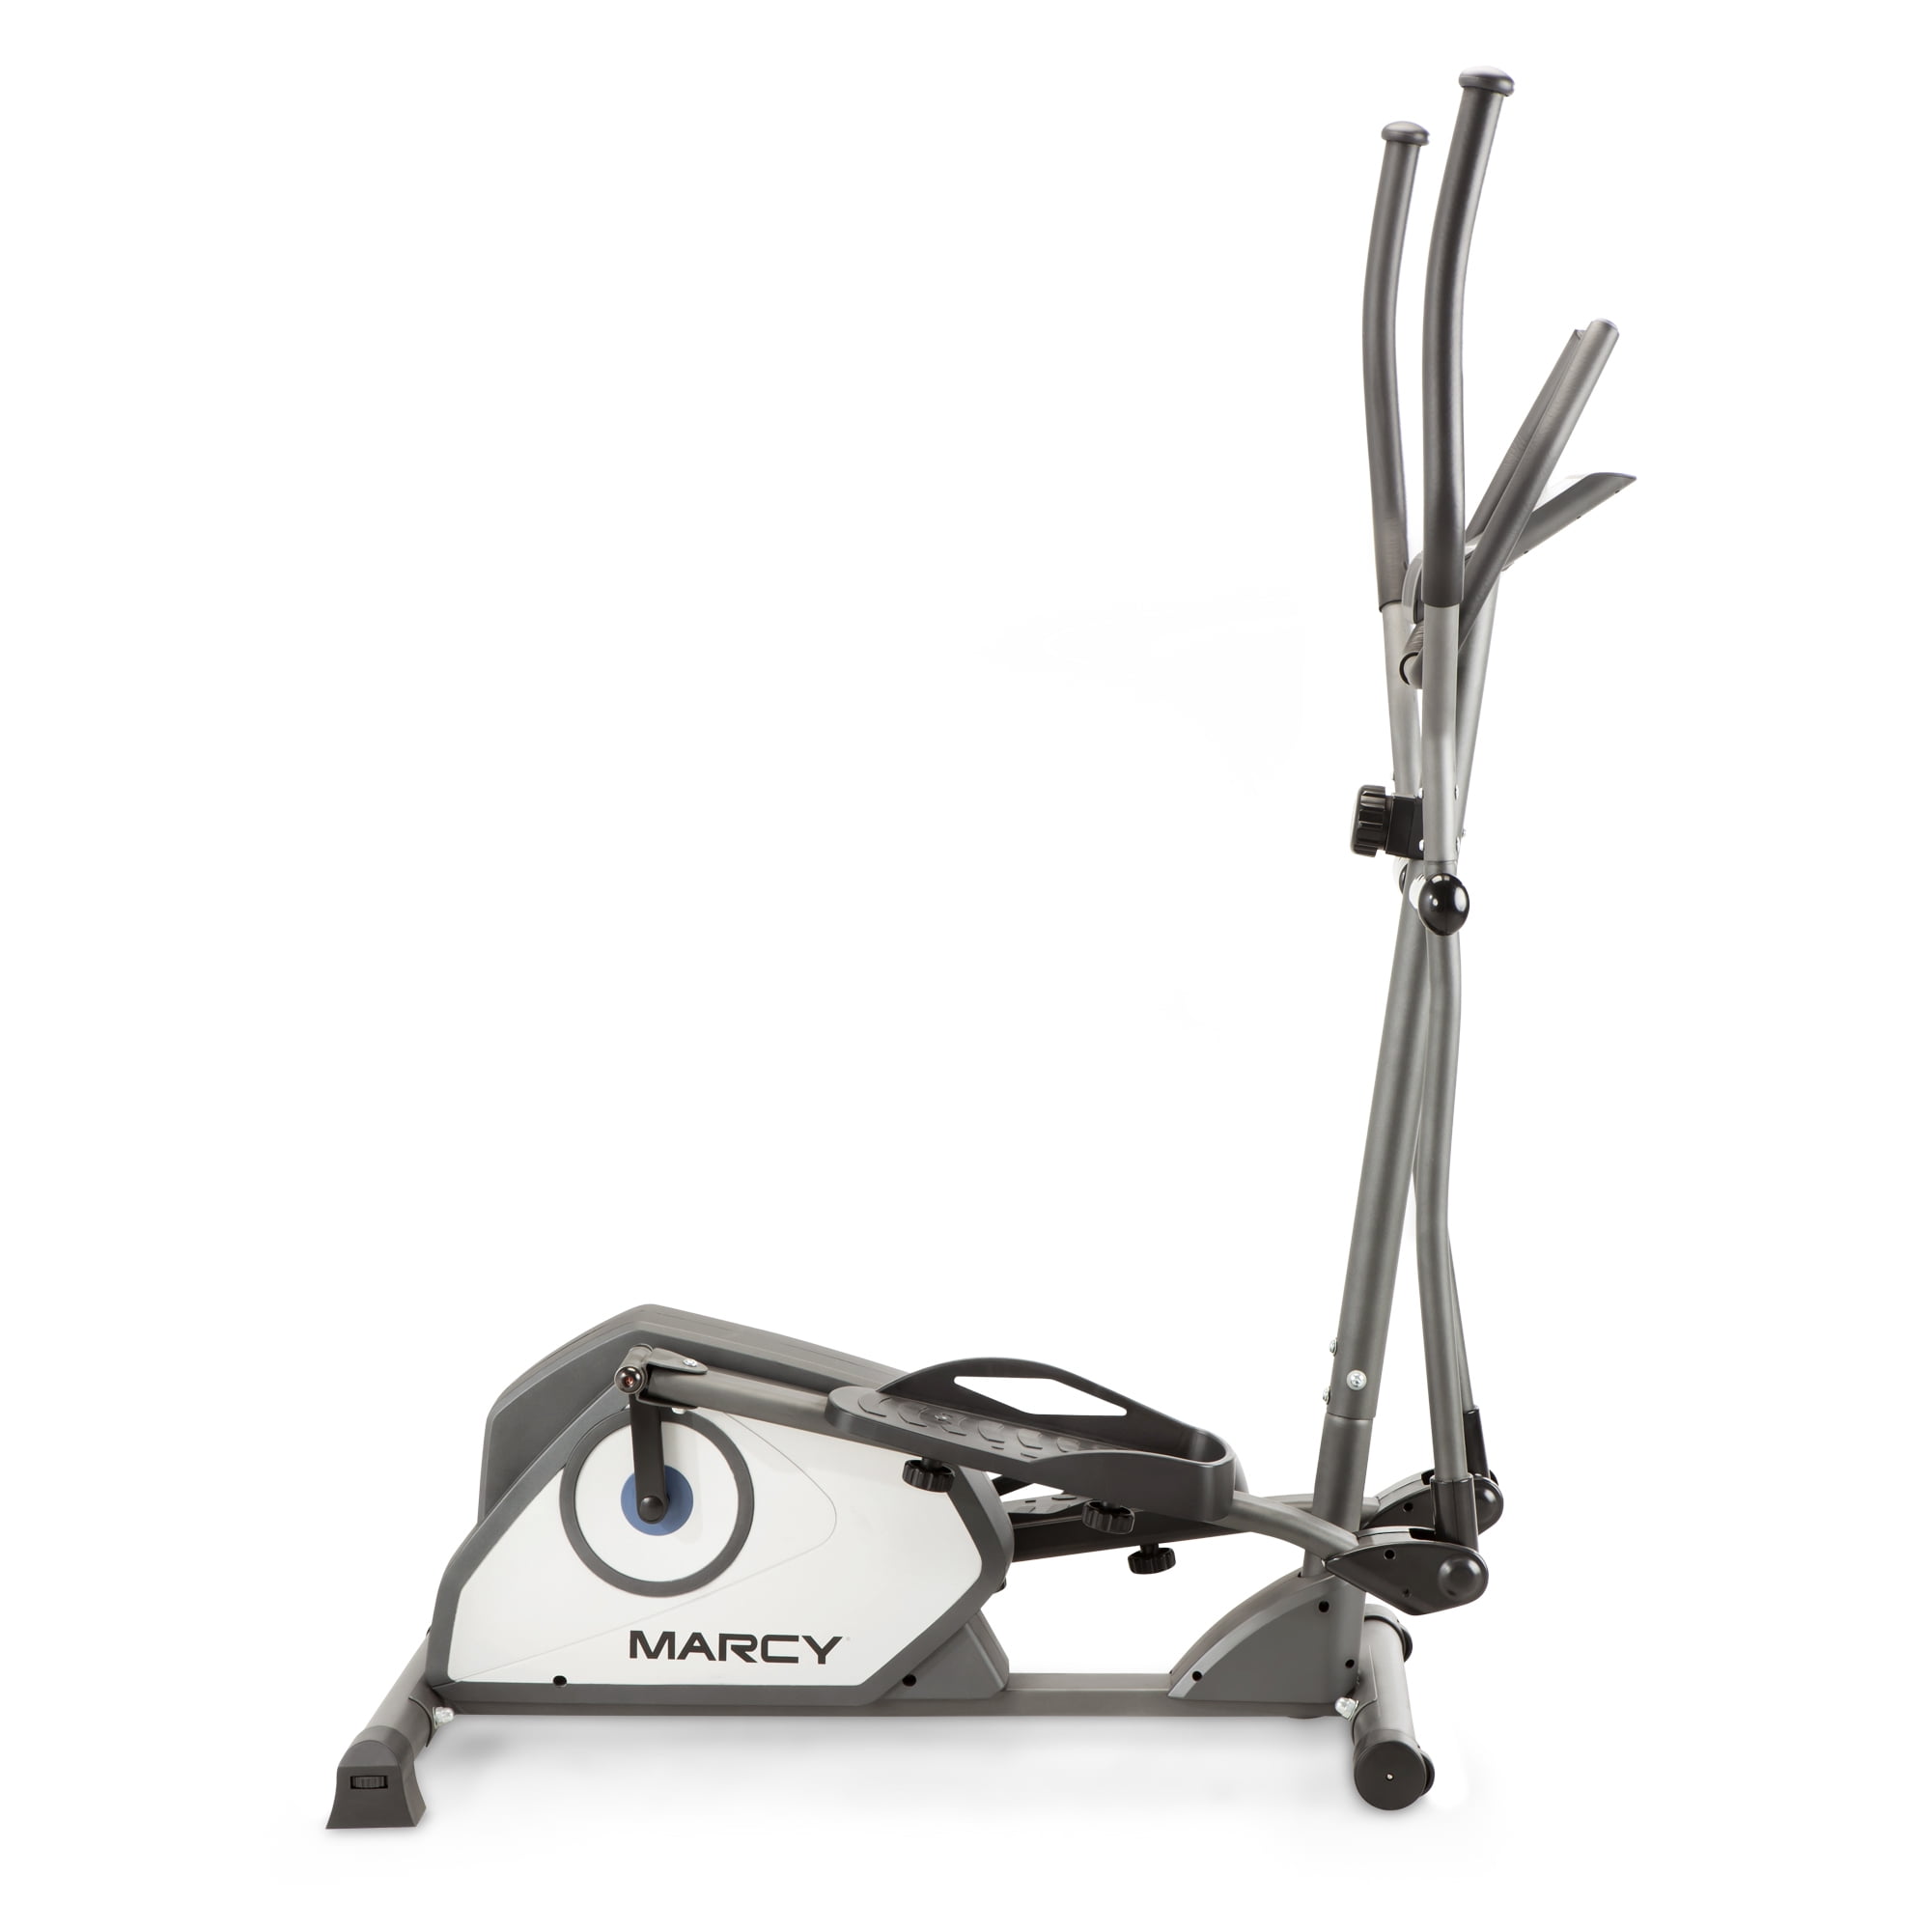 300 Pound User Capacity NS-1201E Marcy 8-Level Magnetic Resistance Elliptical Trainer with Oversized Pedals